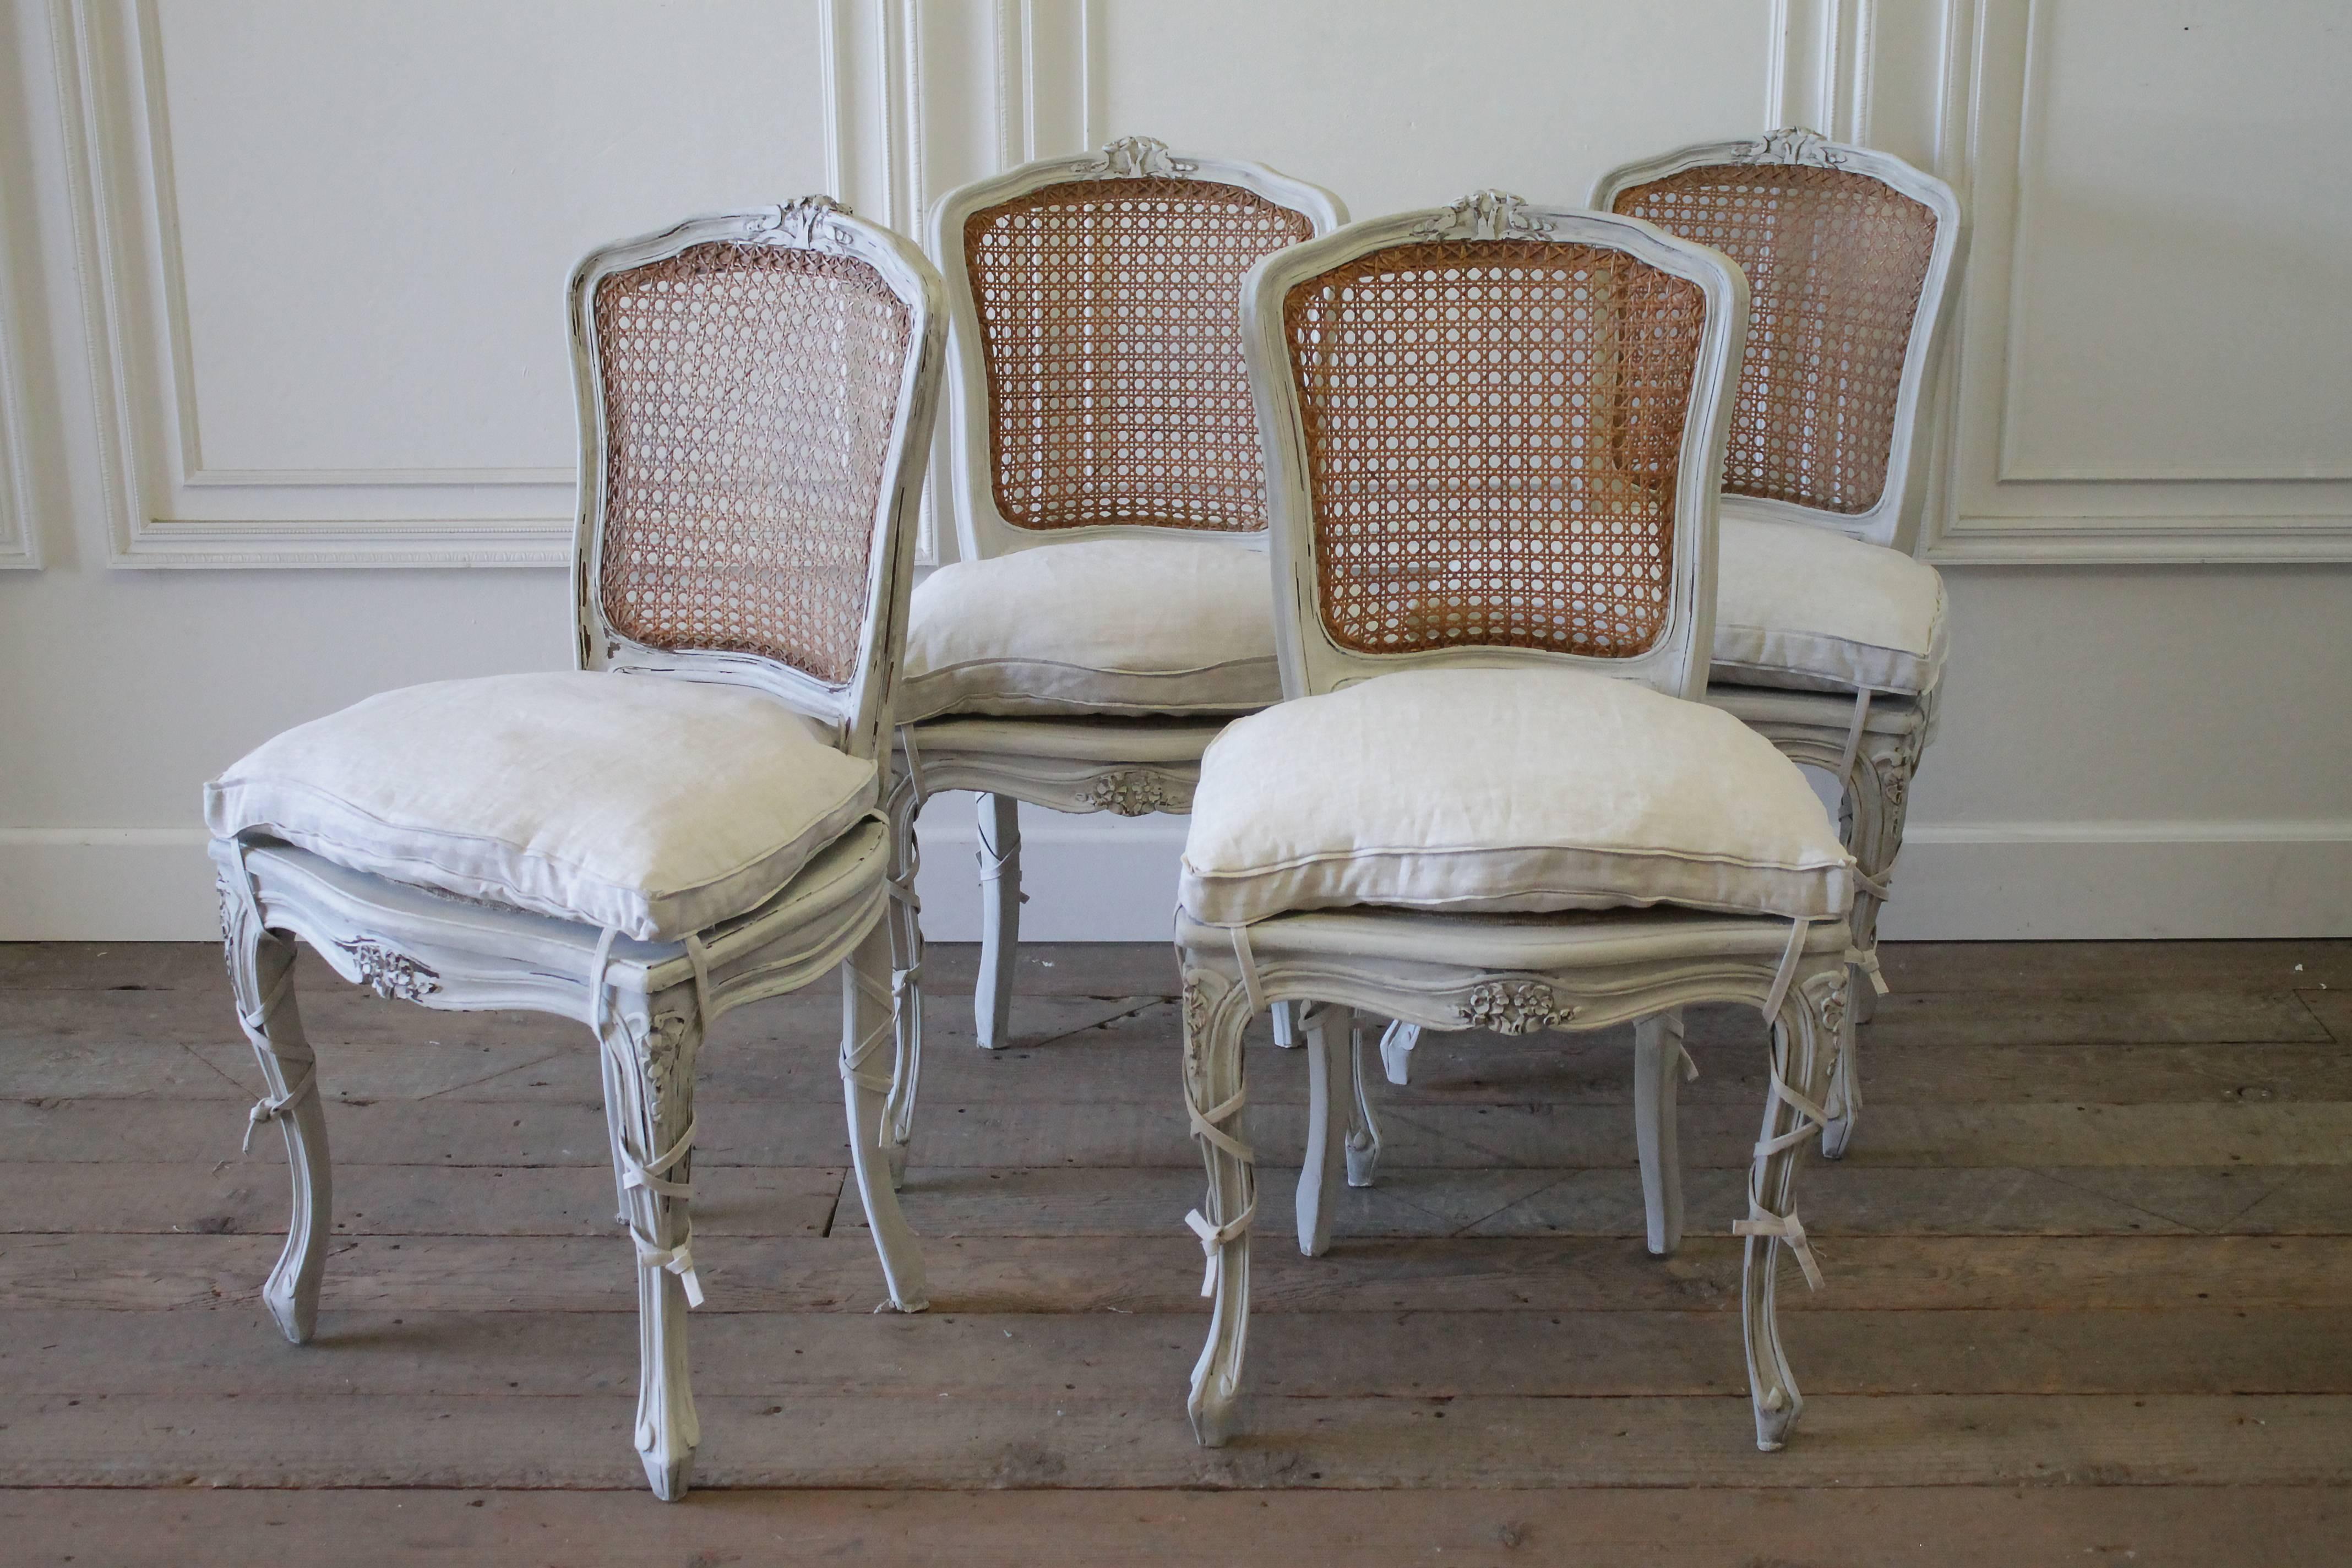 19th century set of four antique French Louis XV style cane back dining chairs
Painted in a soft oyster white, with natural original cane backs, subtle distressed edges, and hand glazed patina.
The custom made seats are sewn from 100% pure Irish